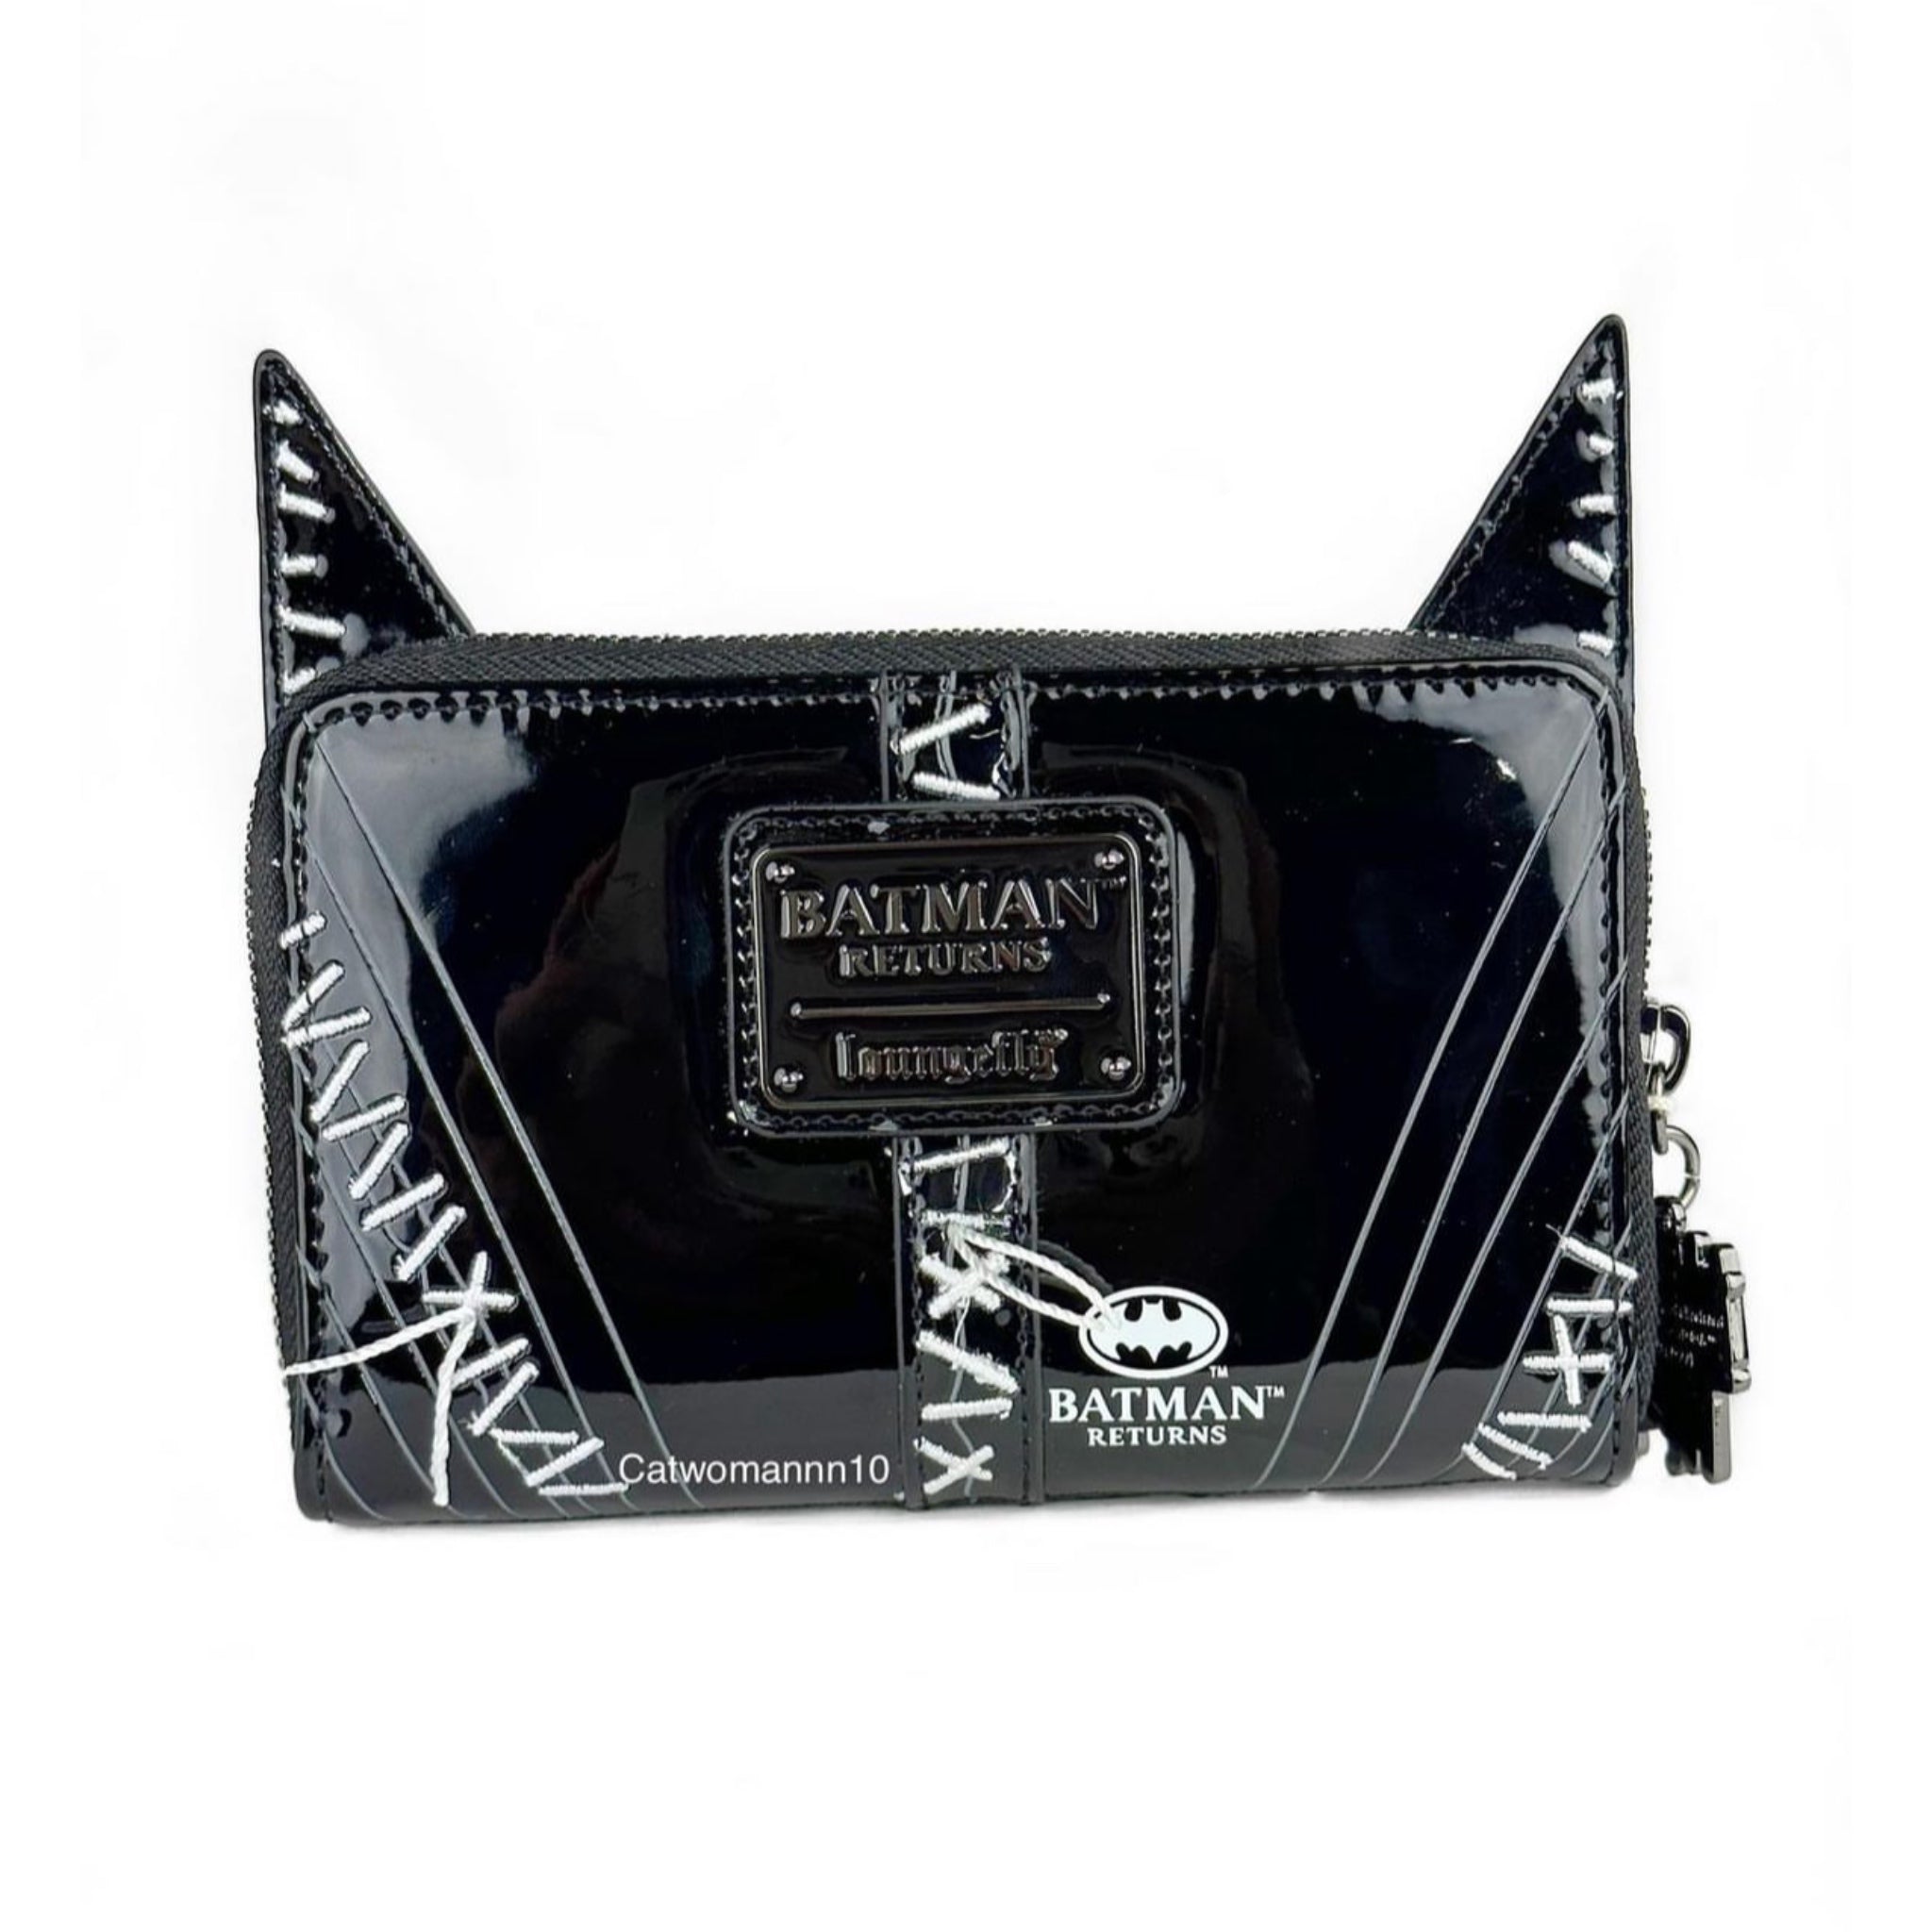 Loungefly Batman Returns Catwoman Wallet - Limited Release